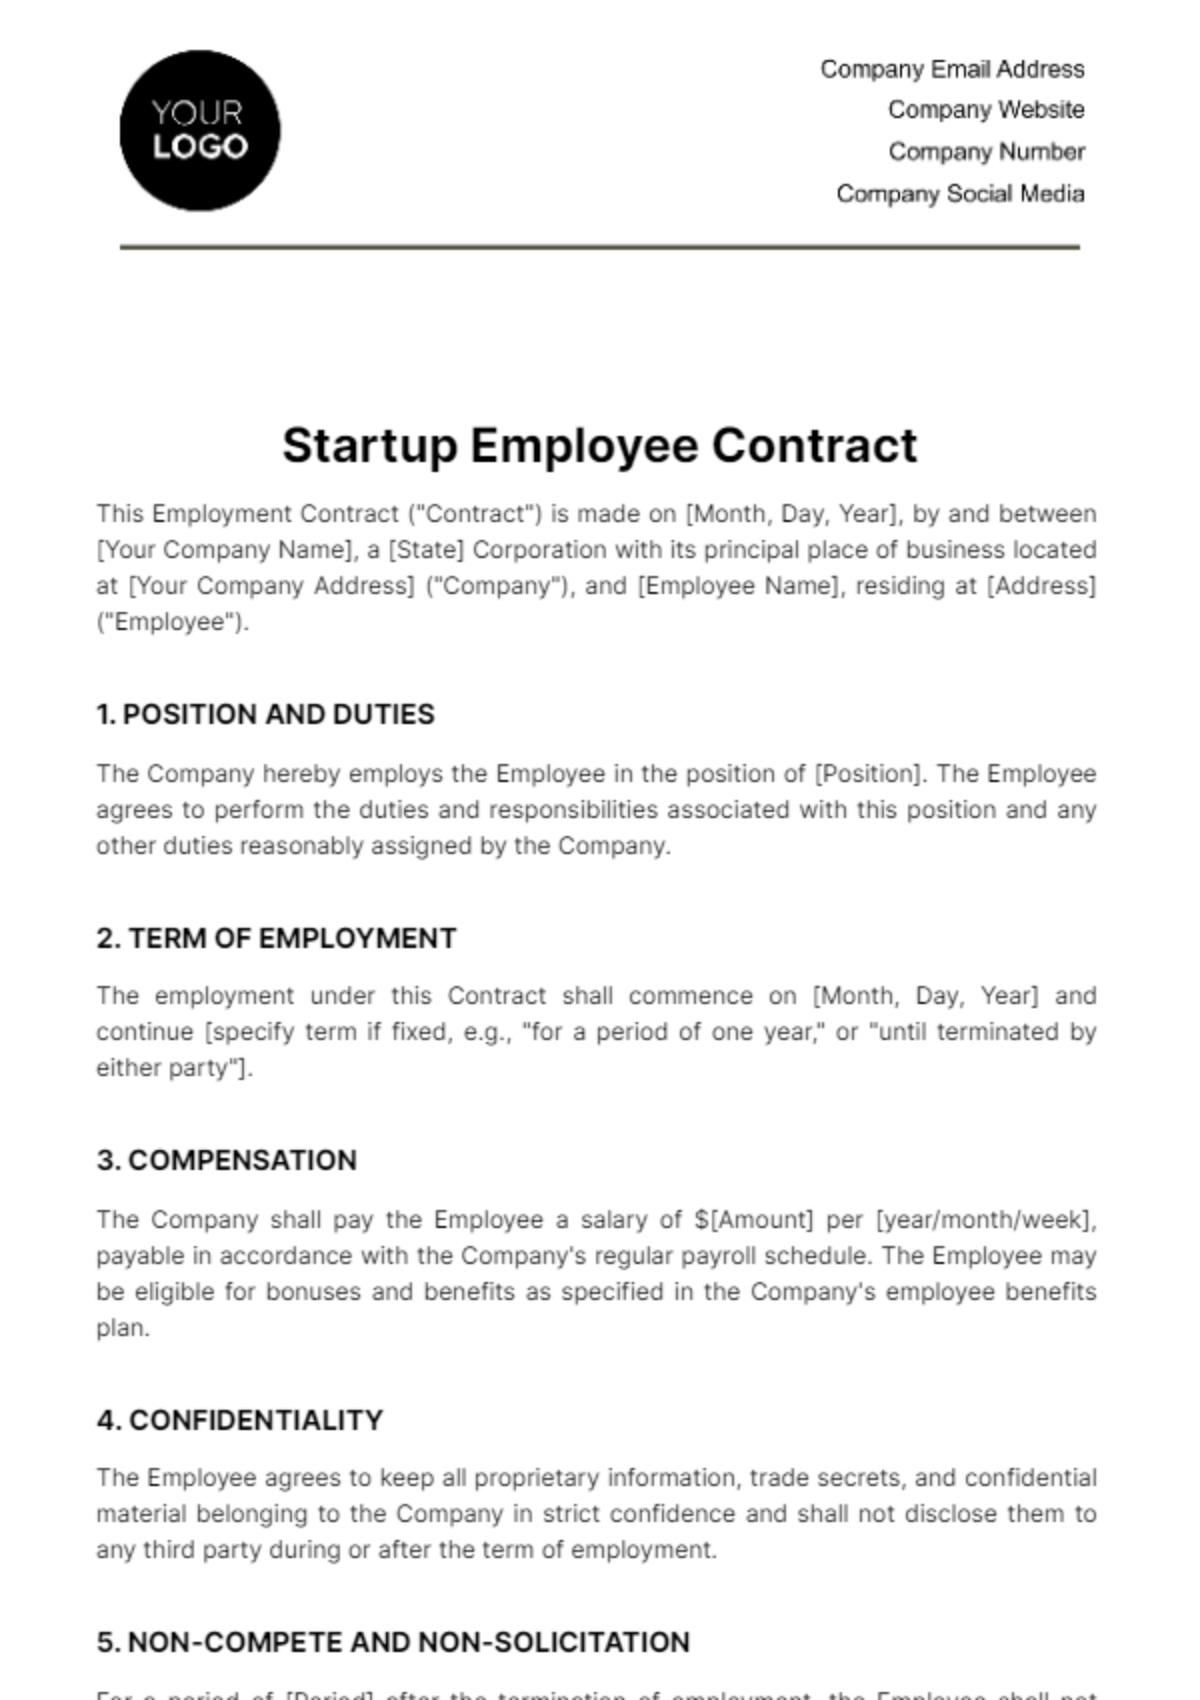 Free Startup Employee Contract Template